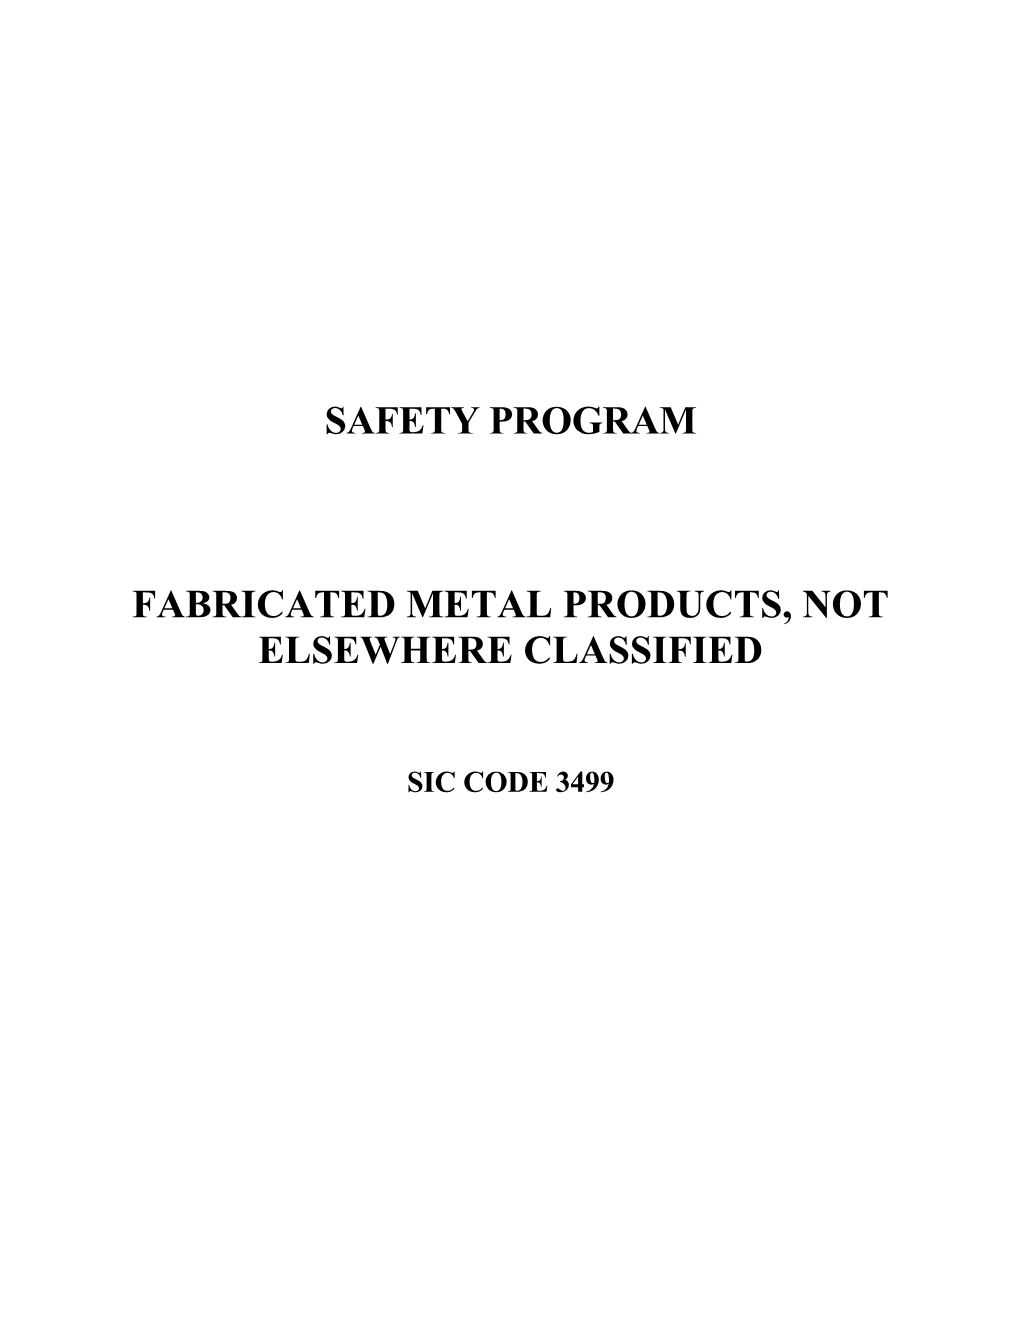 Fabricated Metal Products Safety Program